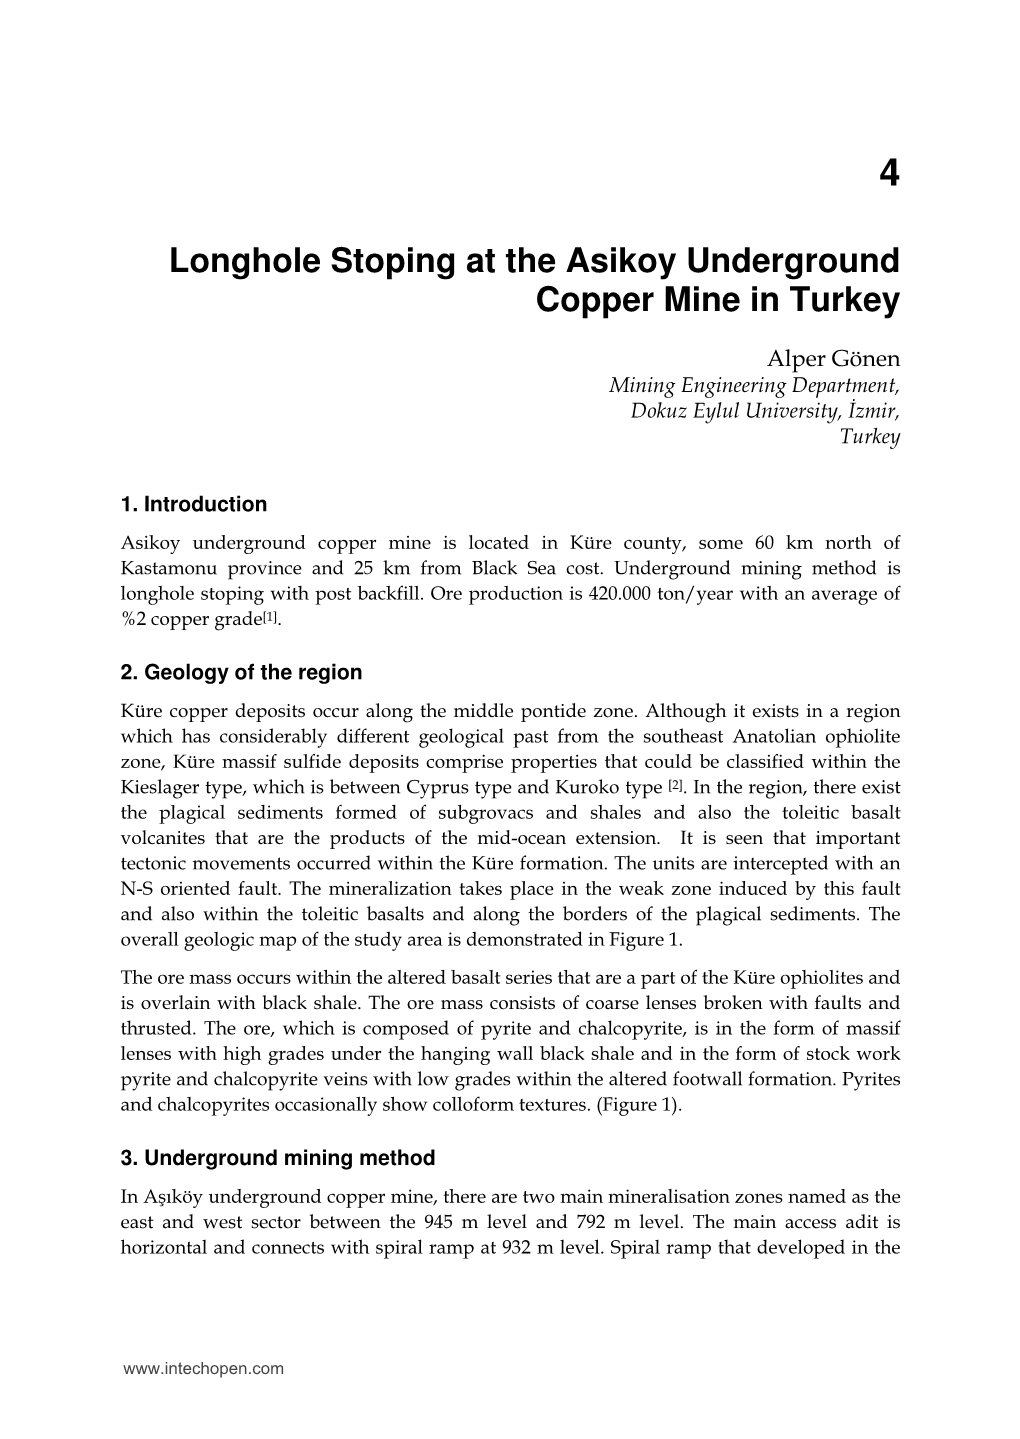 Longhole Stoping at the Asikoy Underground Copper Mine in Turkey